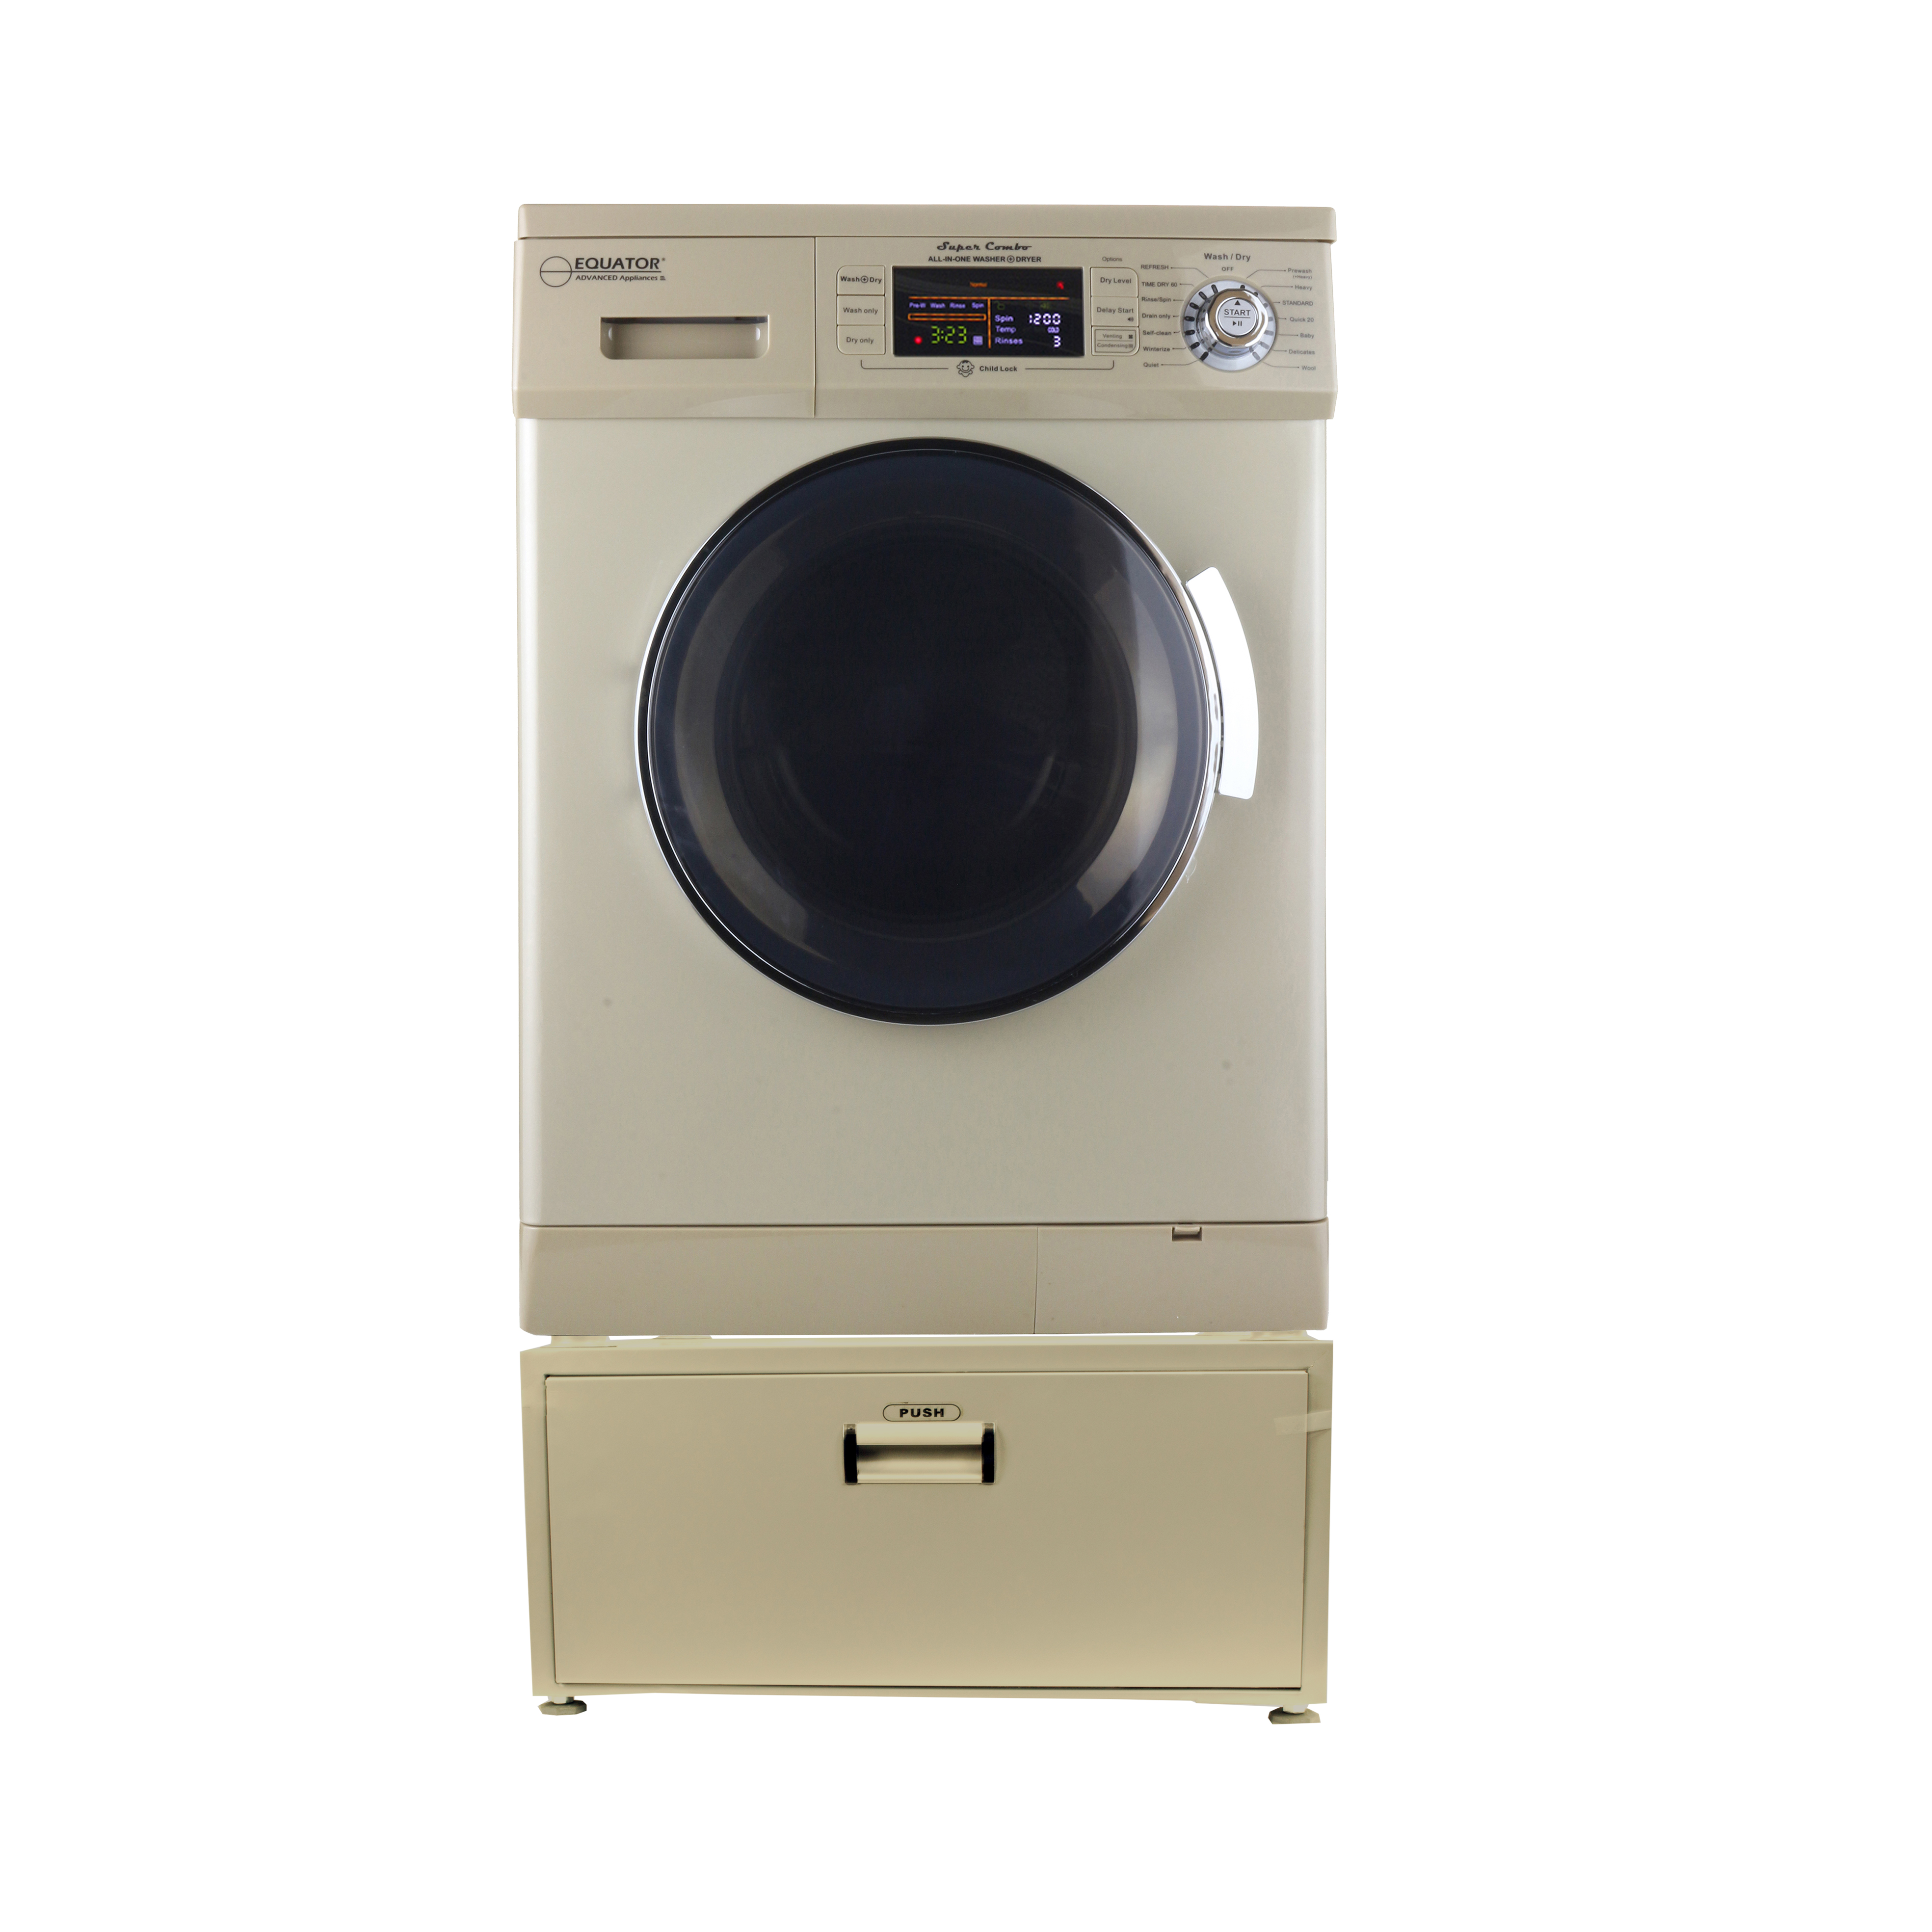 Equator EZ 4400 N Gold All-in-one New Compact Combo Washer Dryer with Pedestal Storage Drawer